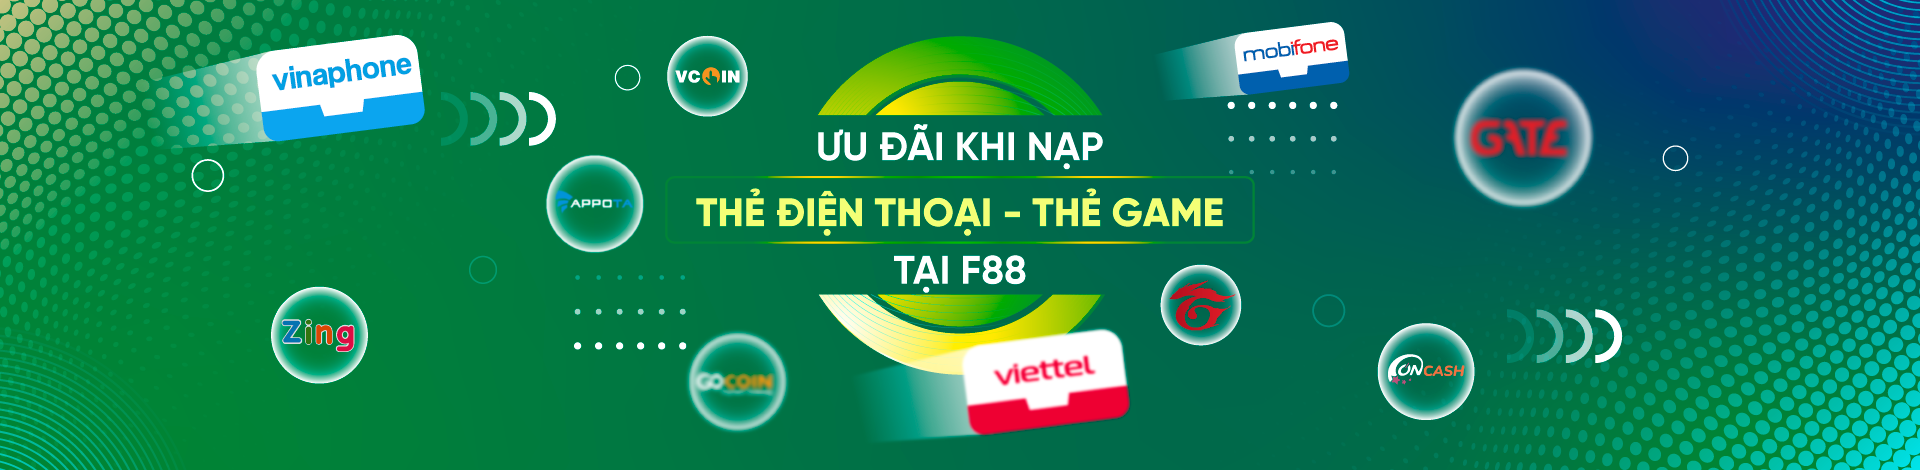 image-banner-image-banner-nap-the-game-the-dien-thoai